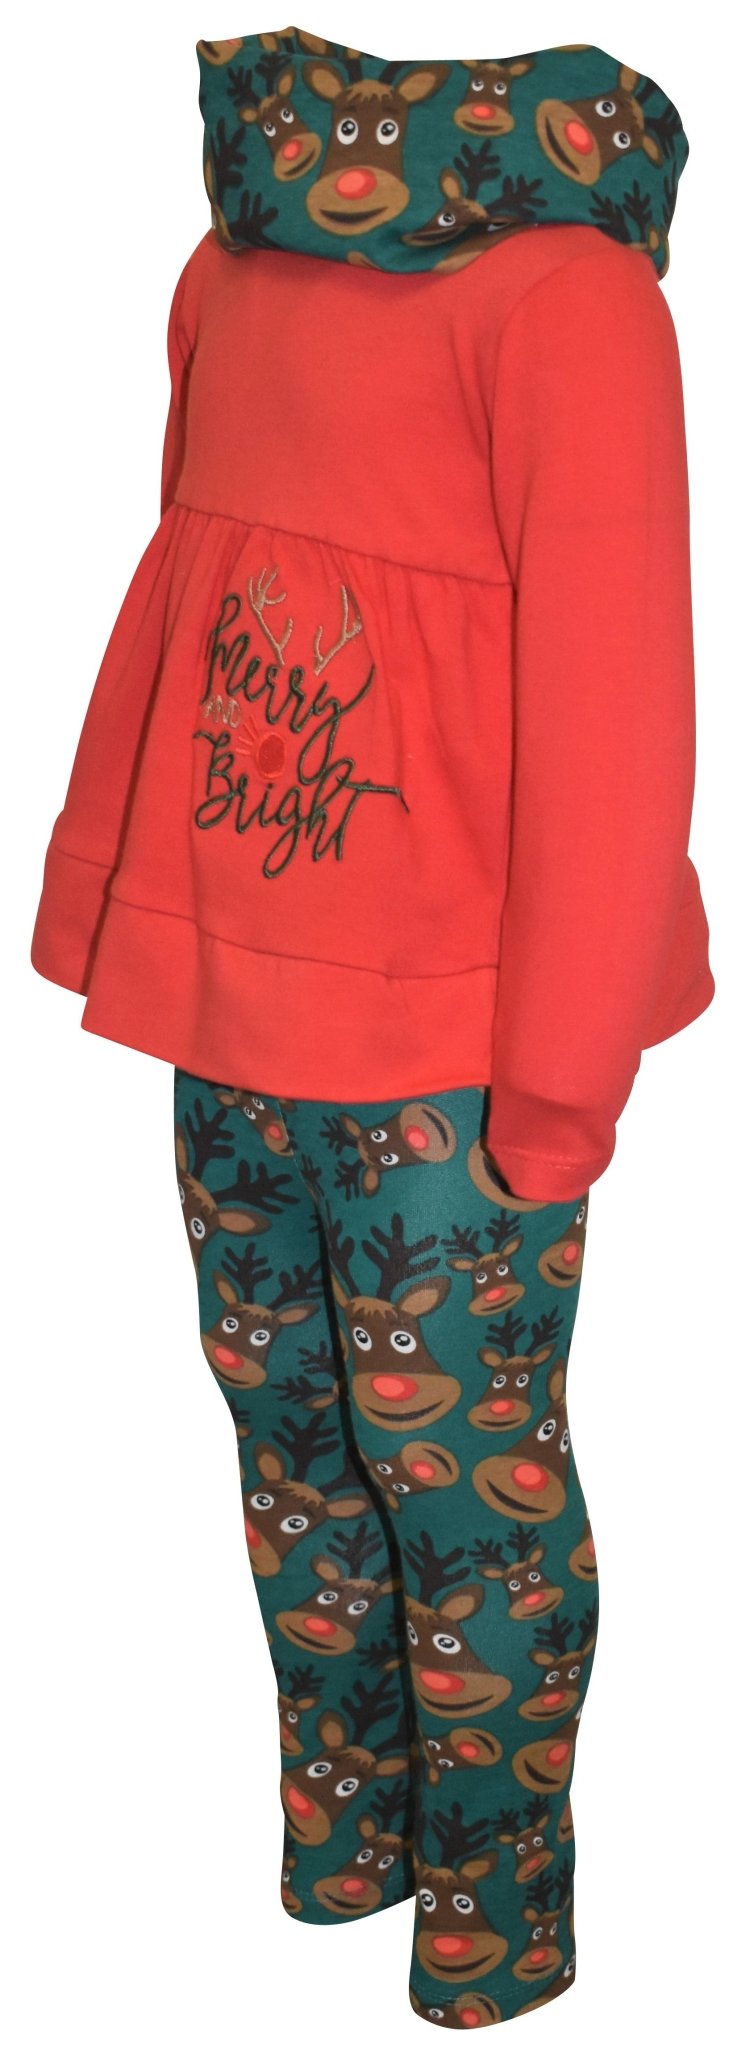 Toddler Kids Girls 3pc Legging Set Merry and Bright Christmas Party Outfit - Unique Baby Shop - Christmas